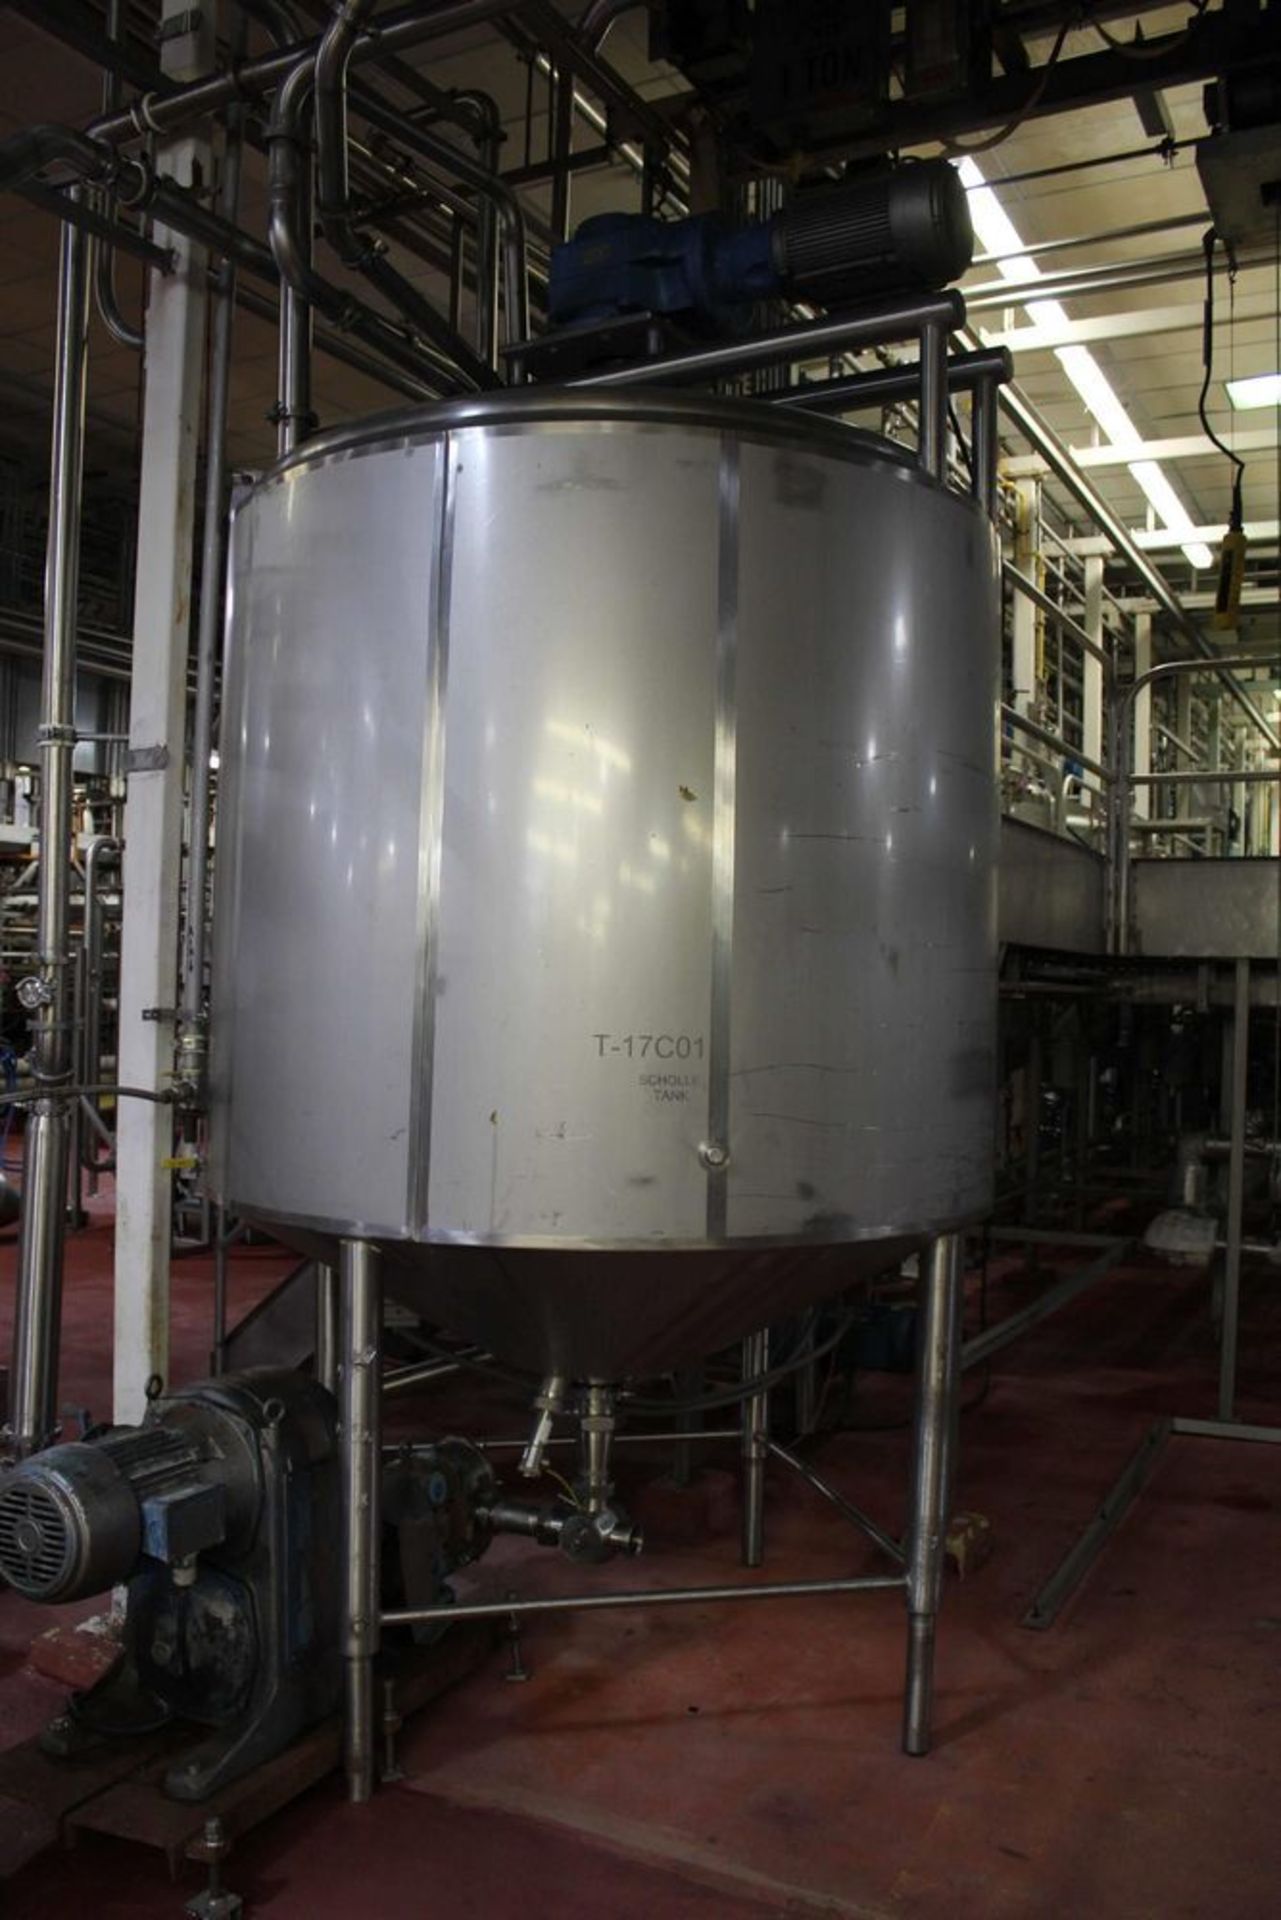 Cherry-Burrell Stainless Steel Insulated Tank - Image 3 of 4